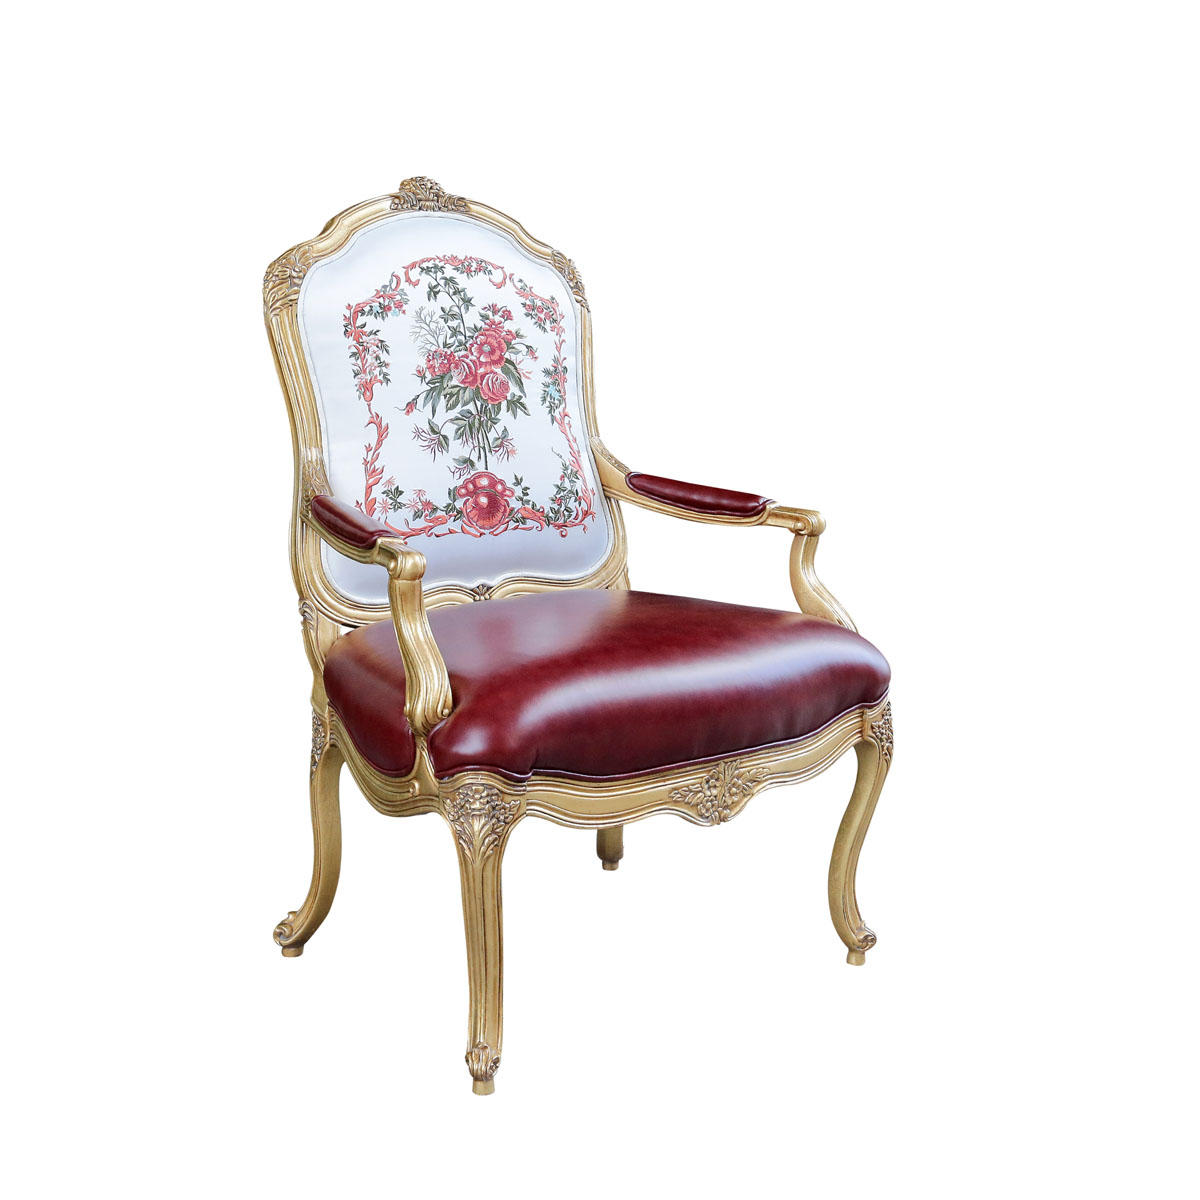 Charlotte Accent Chair